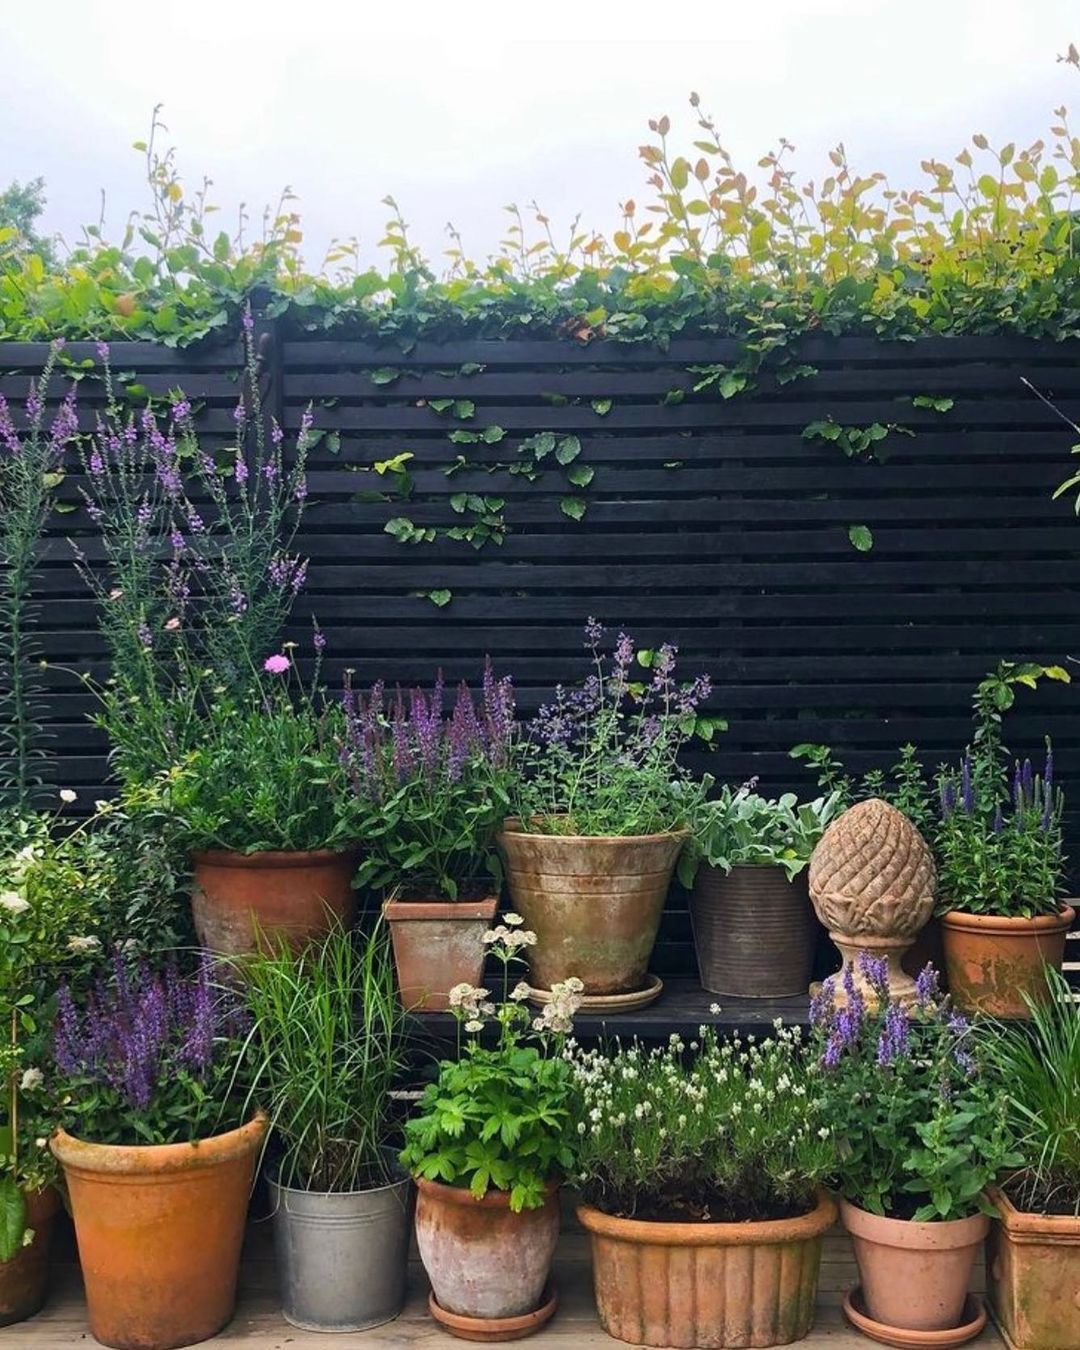 Tips for Maximizing Your Tiny Garden Space